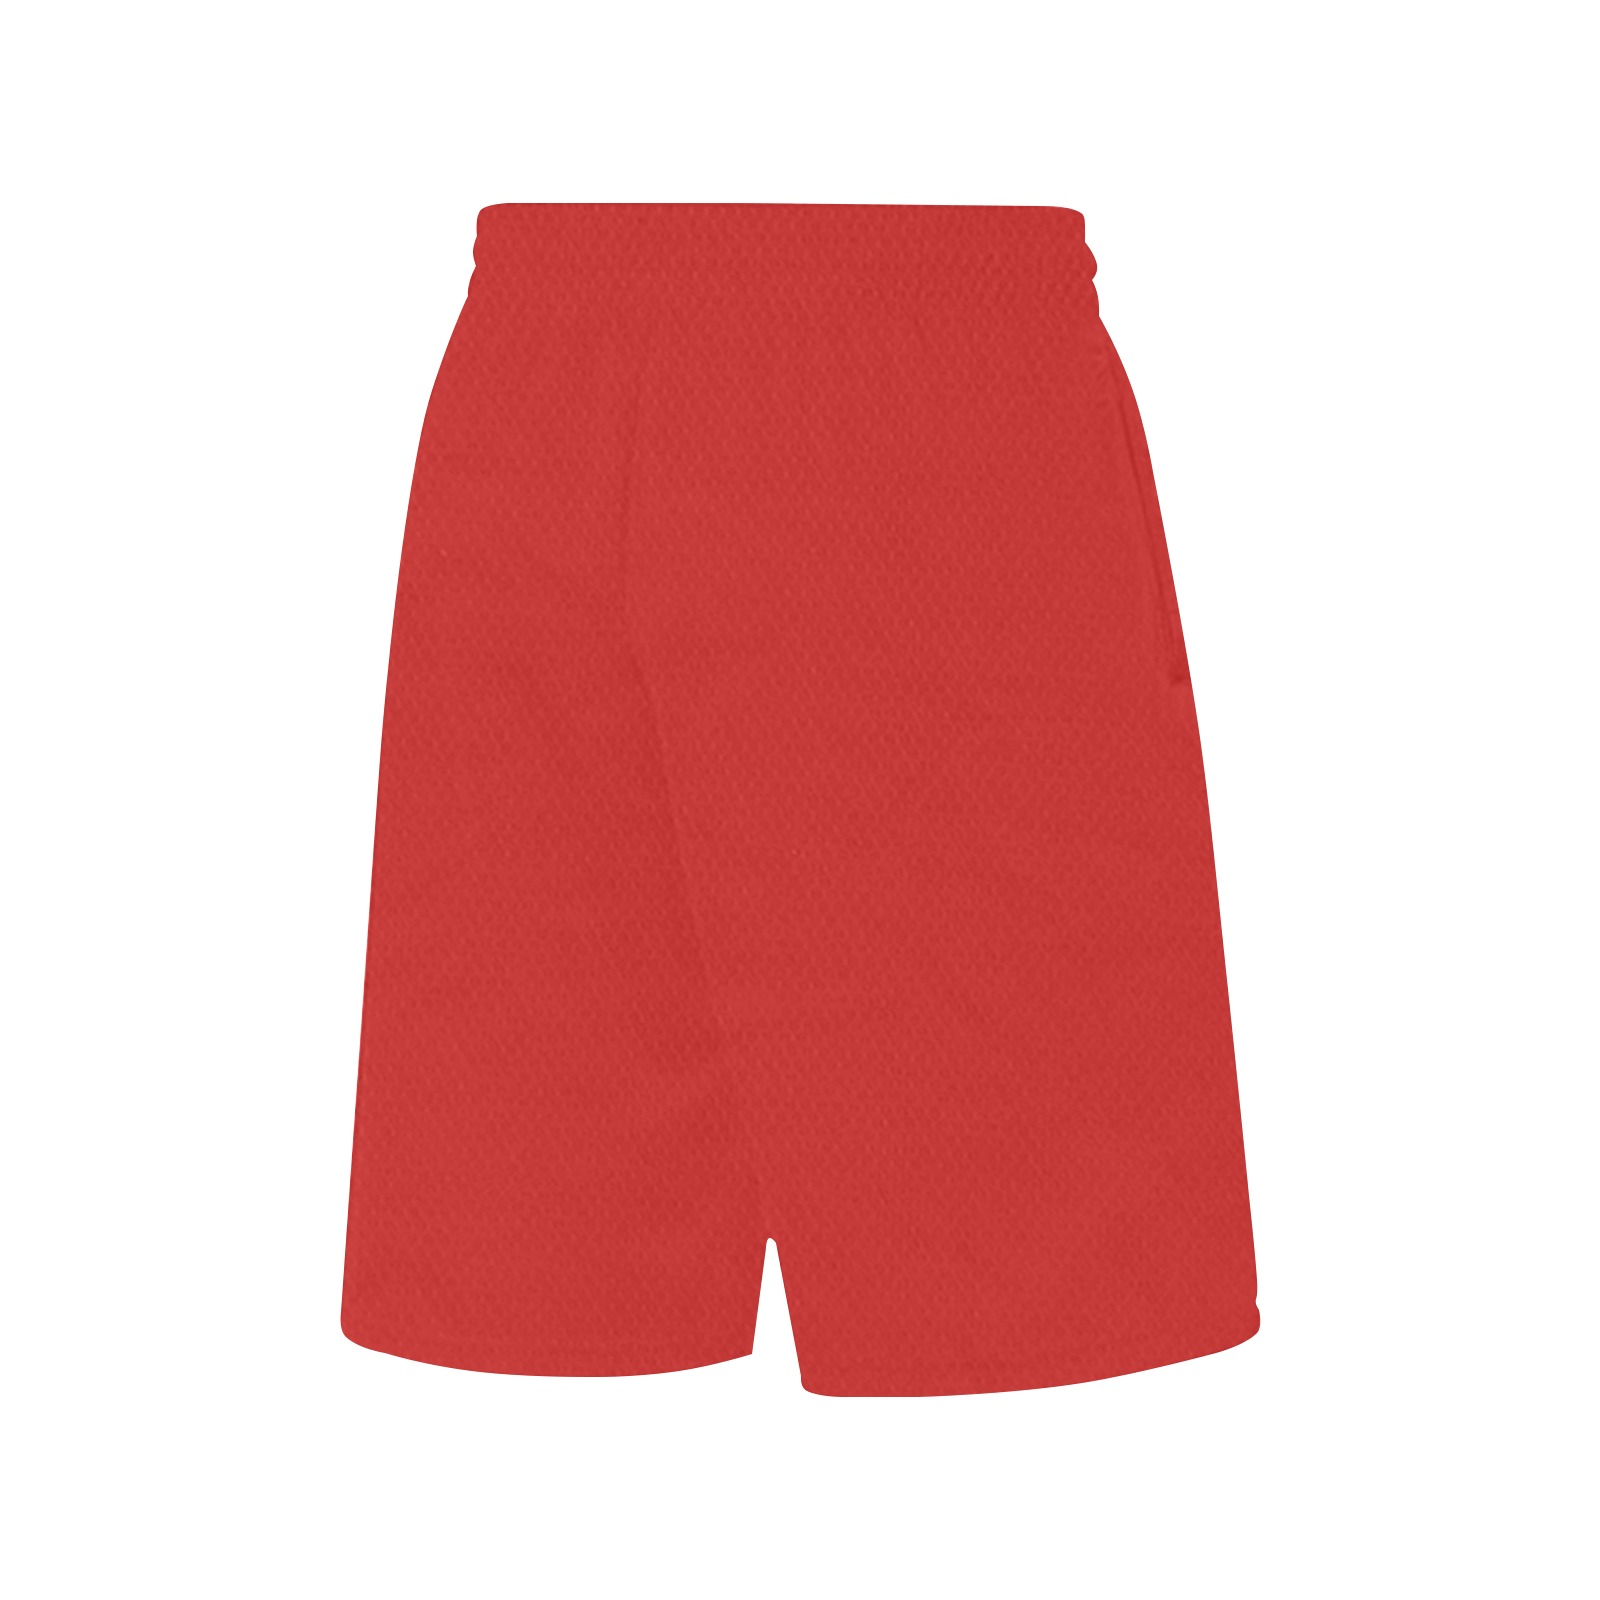 red All Over Print Basketball Shorts with Pocket